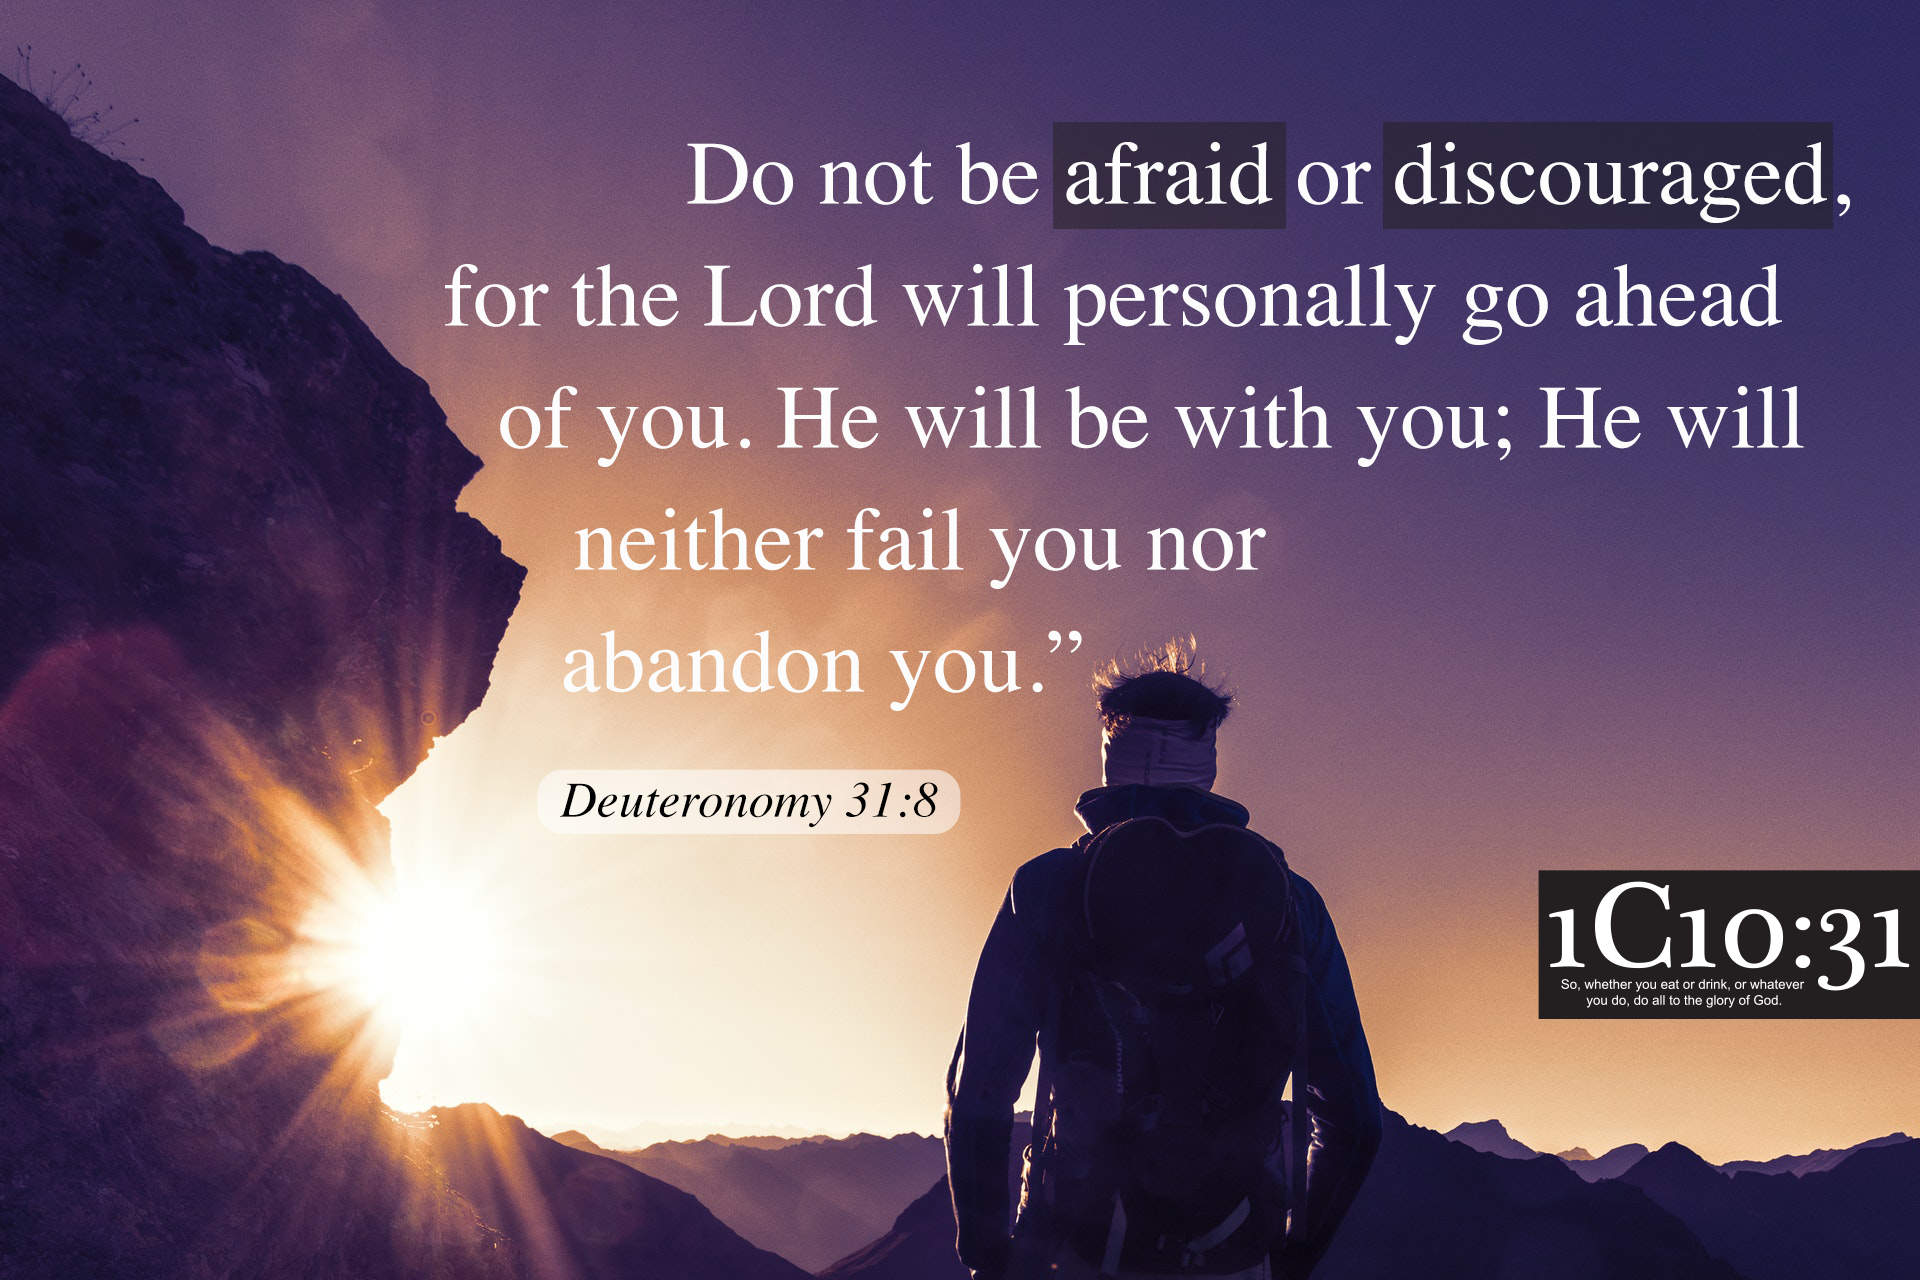 Do not be afraid or discouraged, for the Lord will personally go ahead of you. He will be with you; He will neither fail you nor abandon you.”